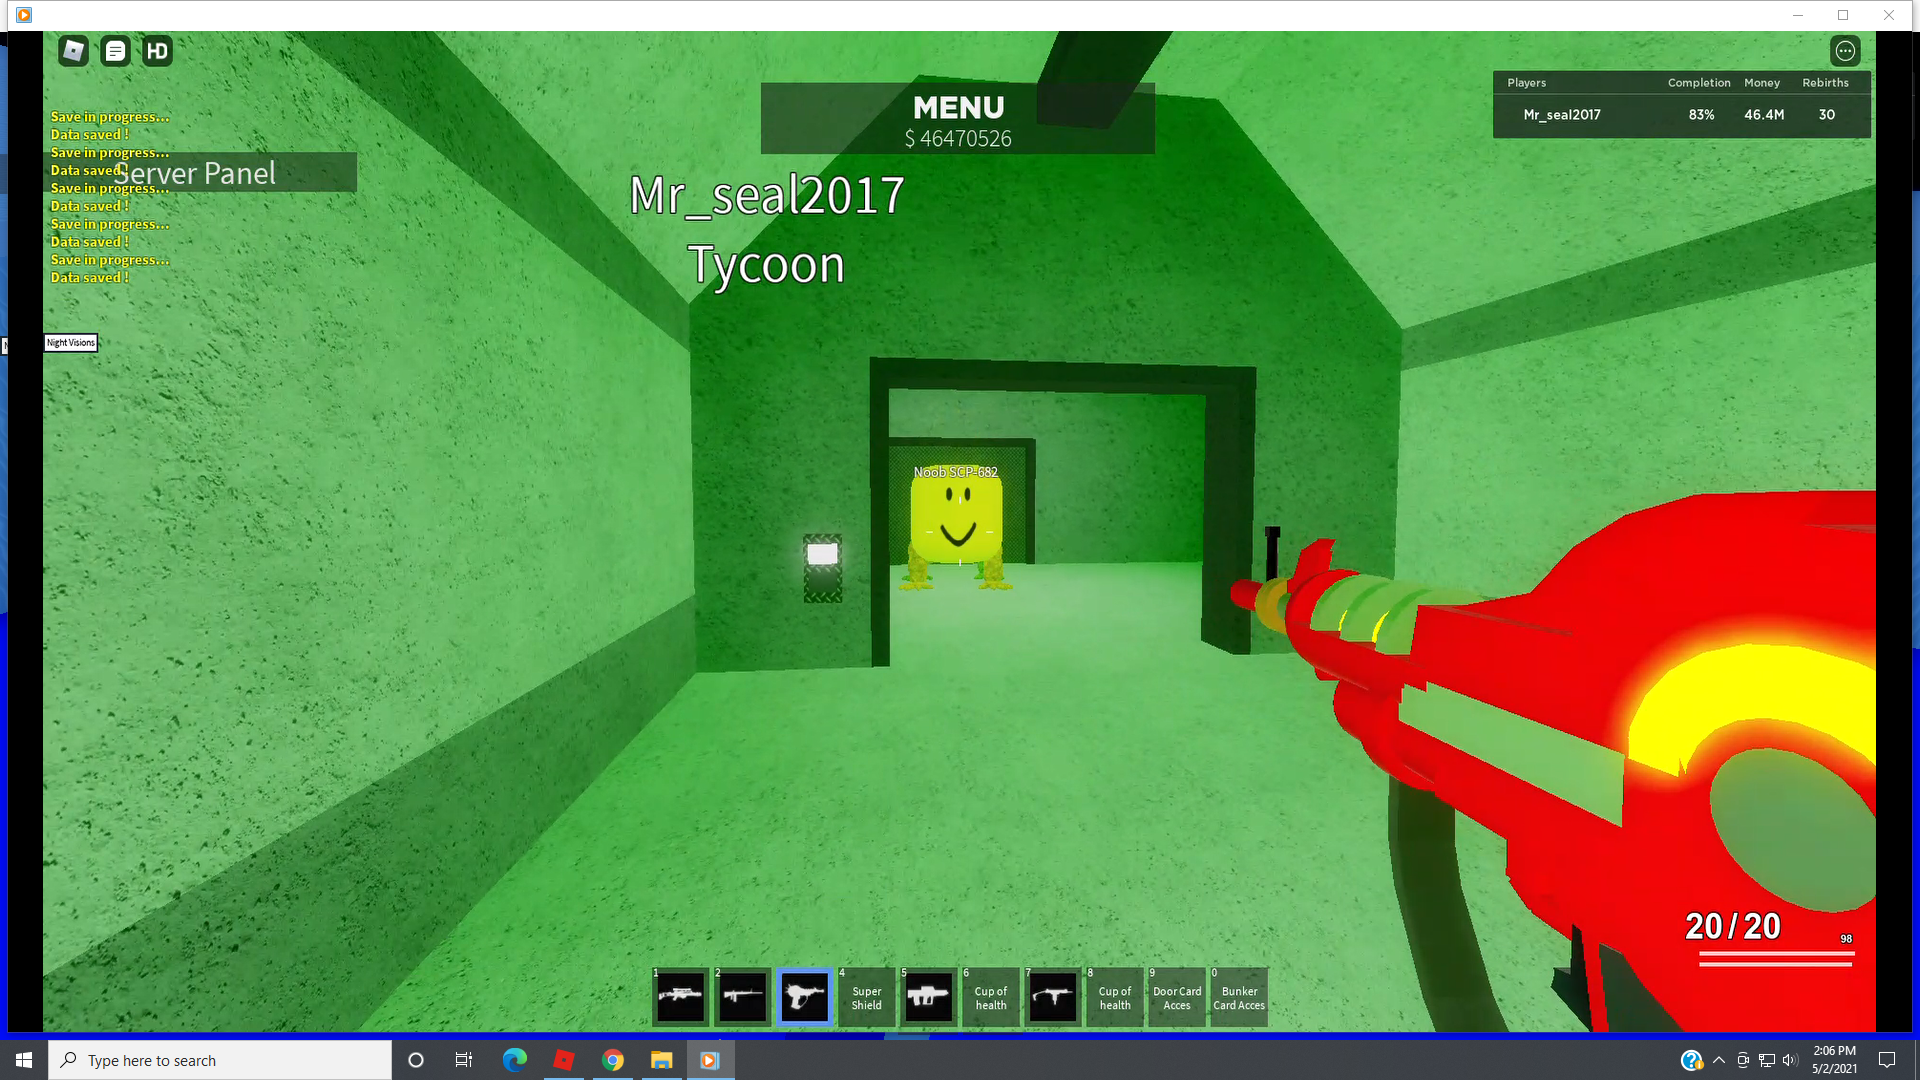 Survive SCP - 682 and set off the Nuke! - Roblox